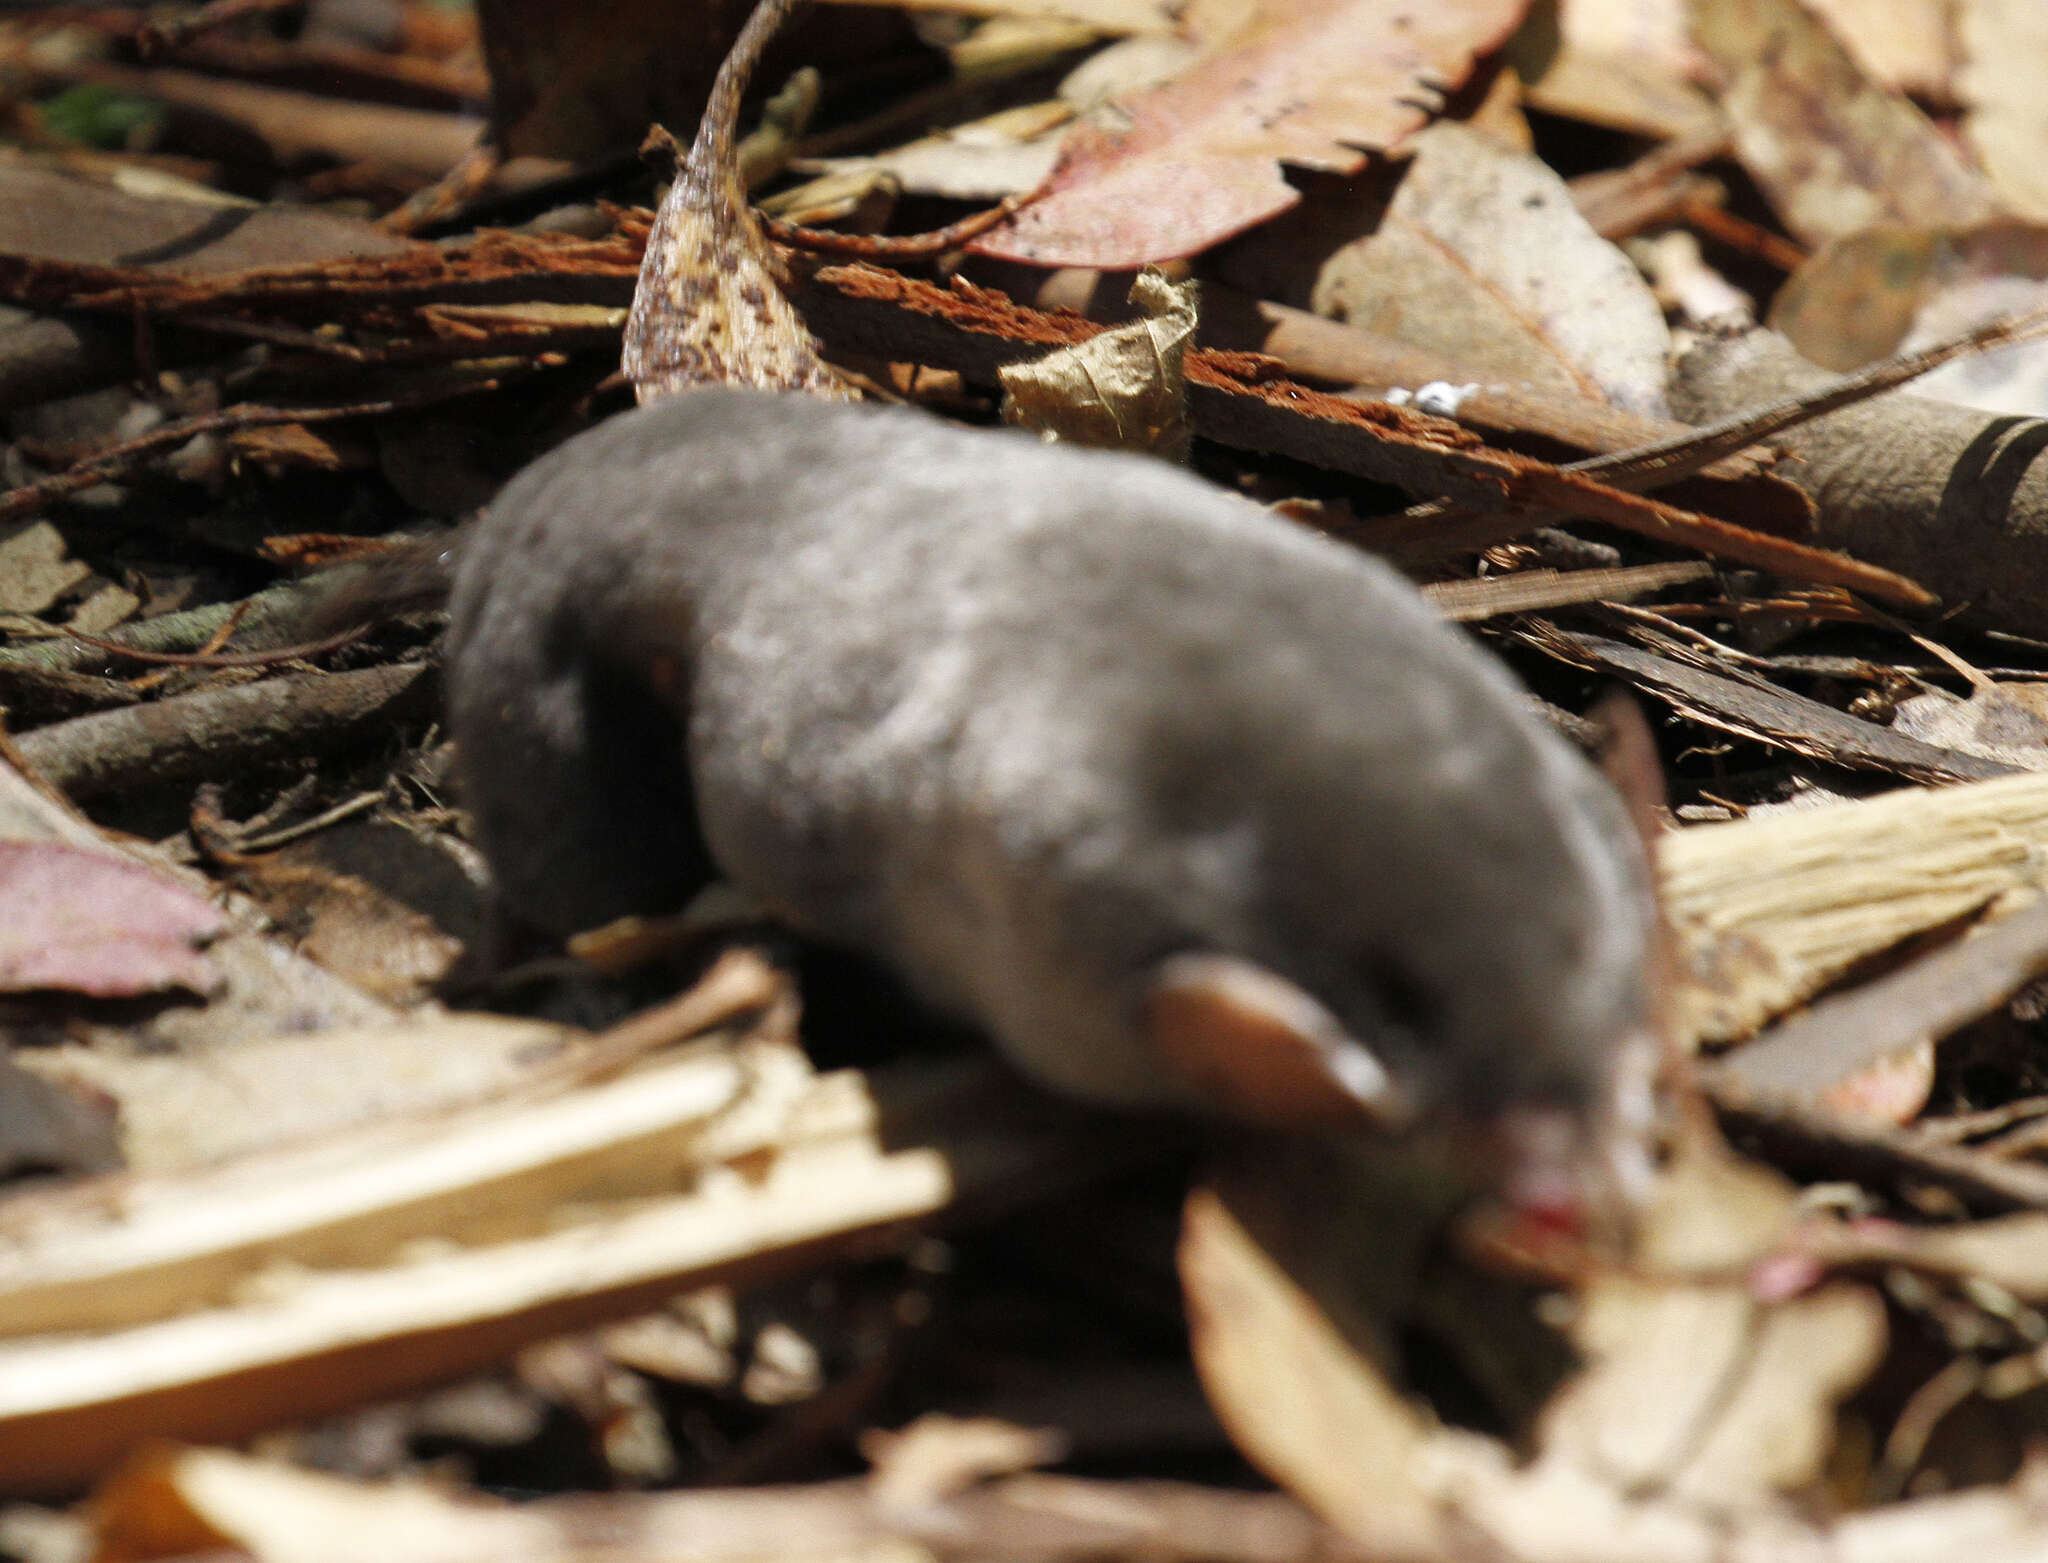 Image of Broad-footed Mole